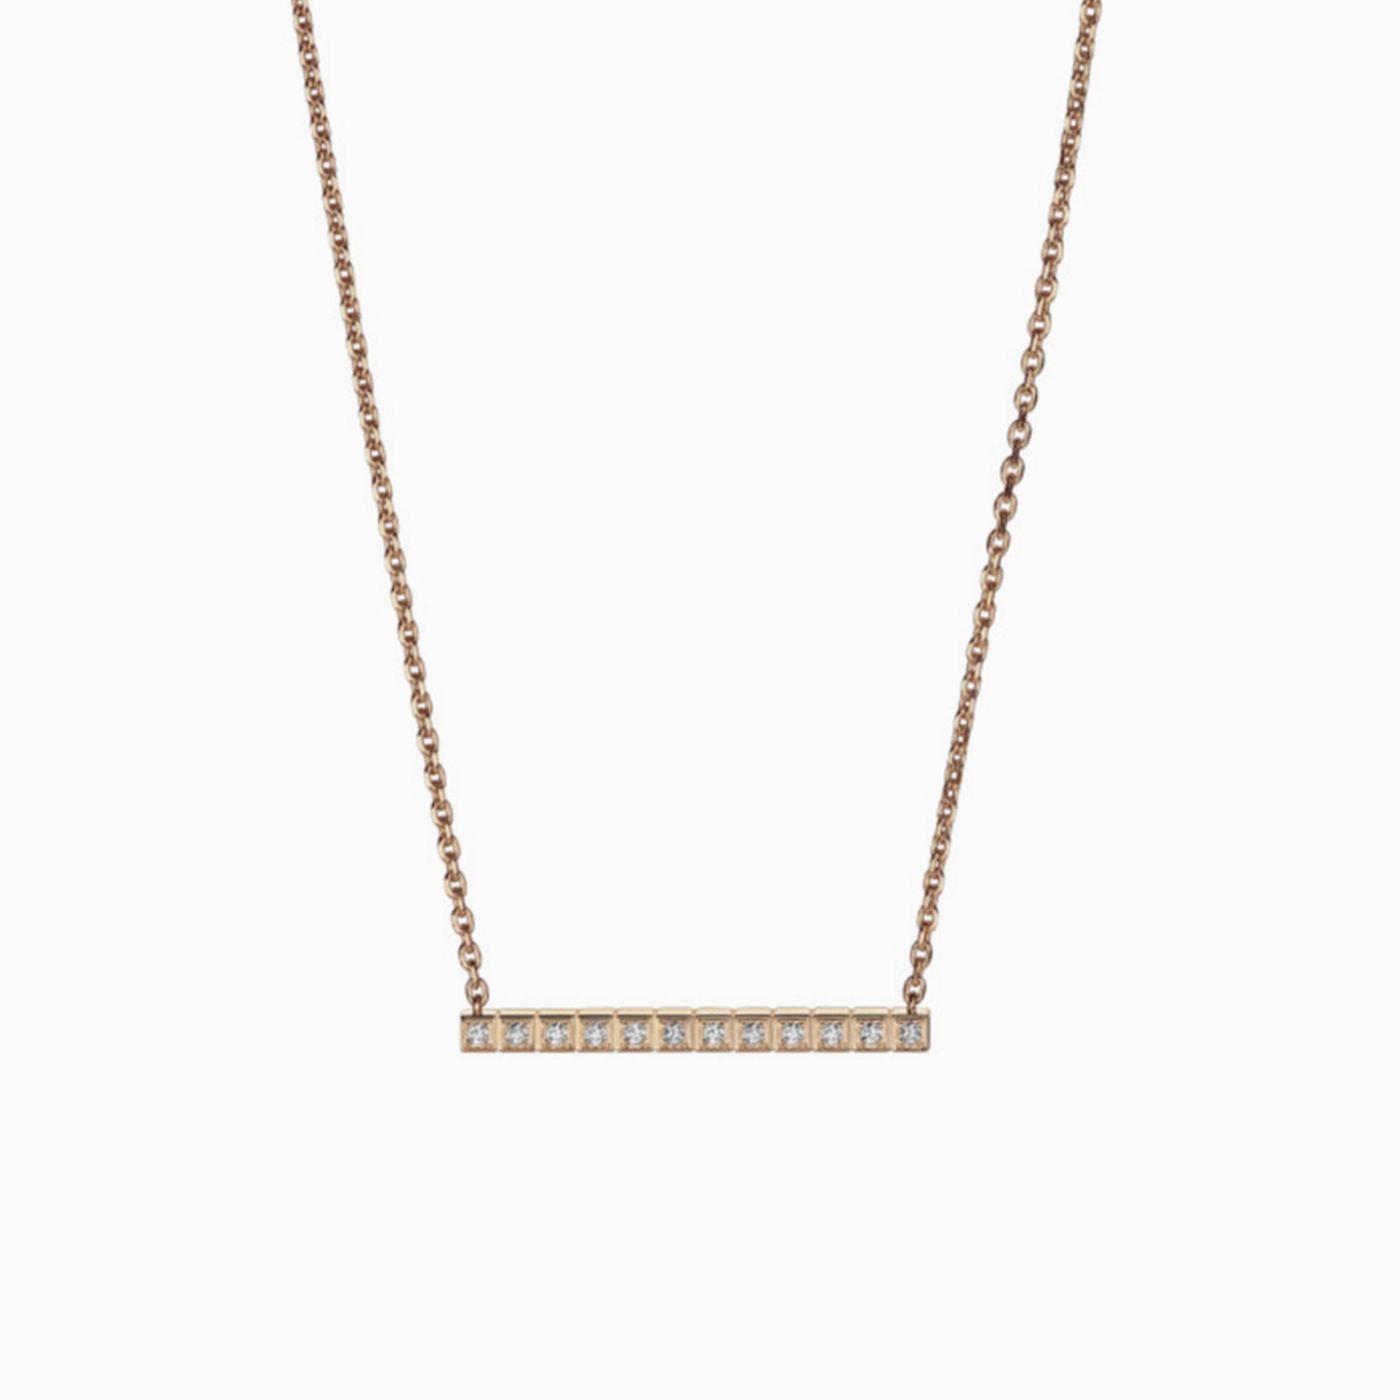 Chopard Ice Cube Necklace 